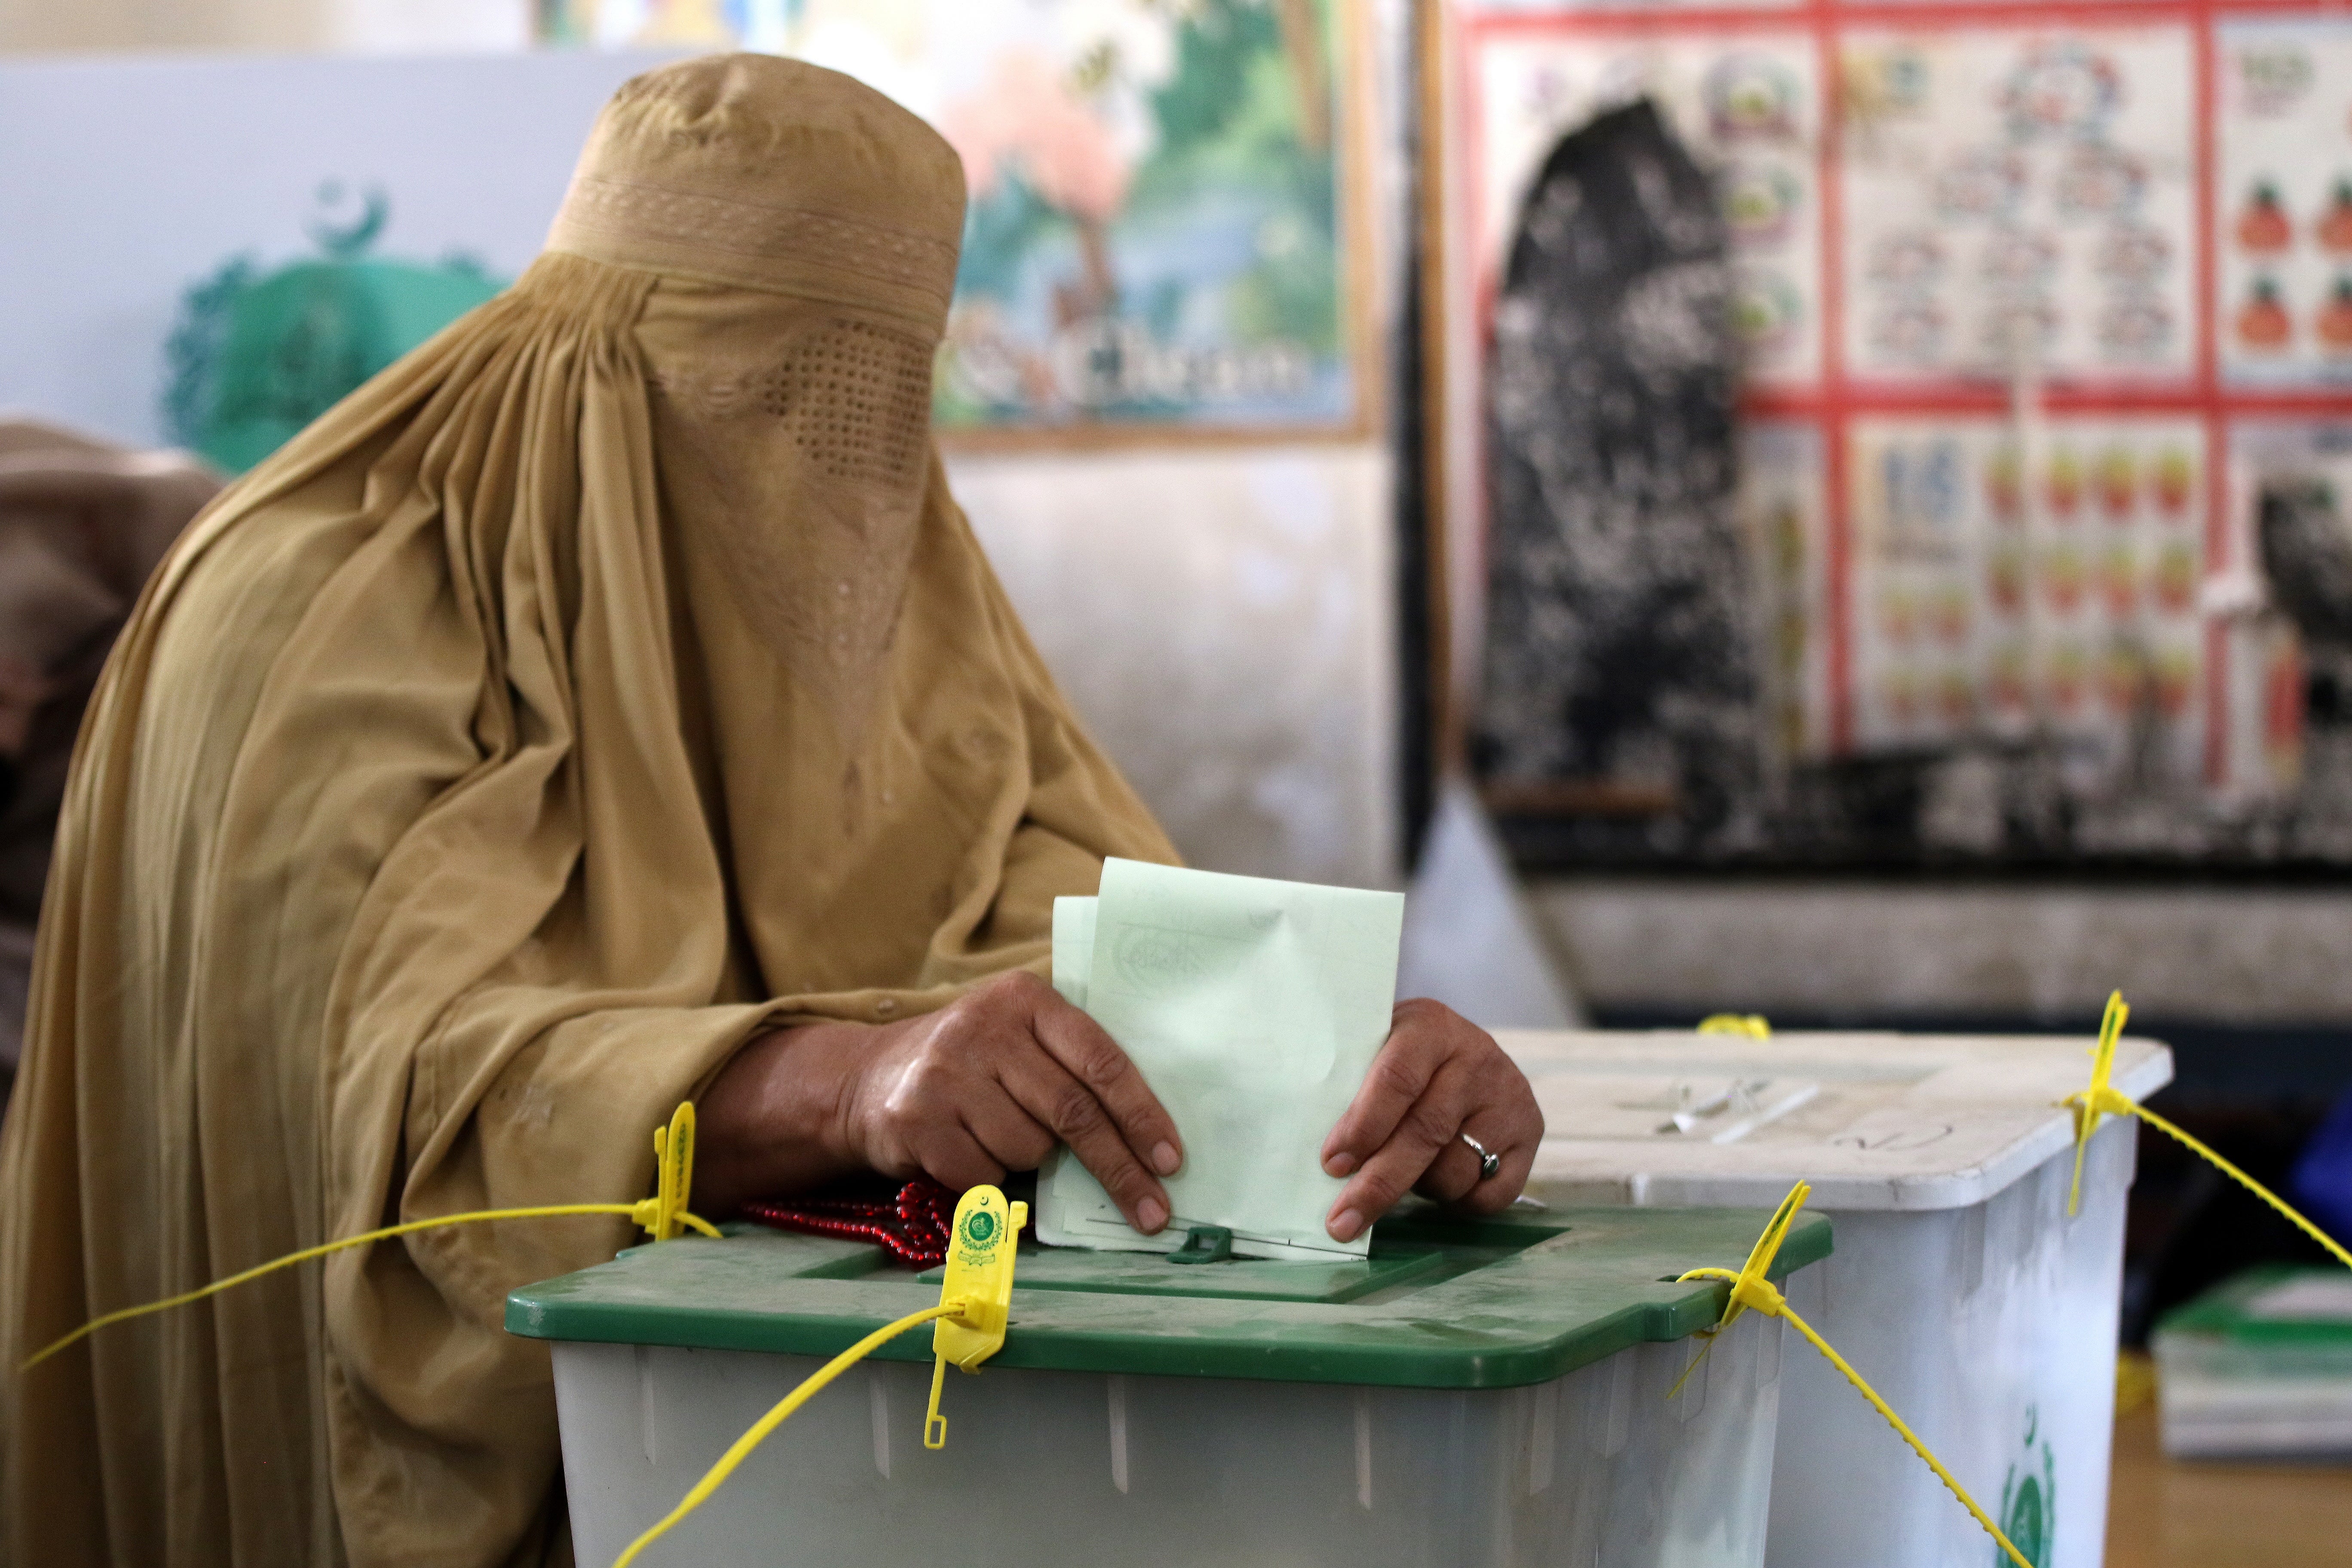 A Burqa-clad woman casts her ballot paper at a polling station during general elections in Peshawar